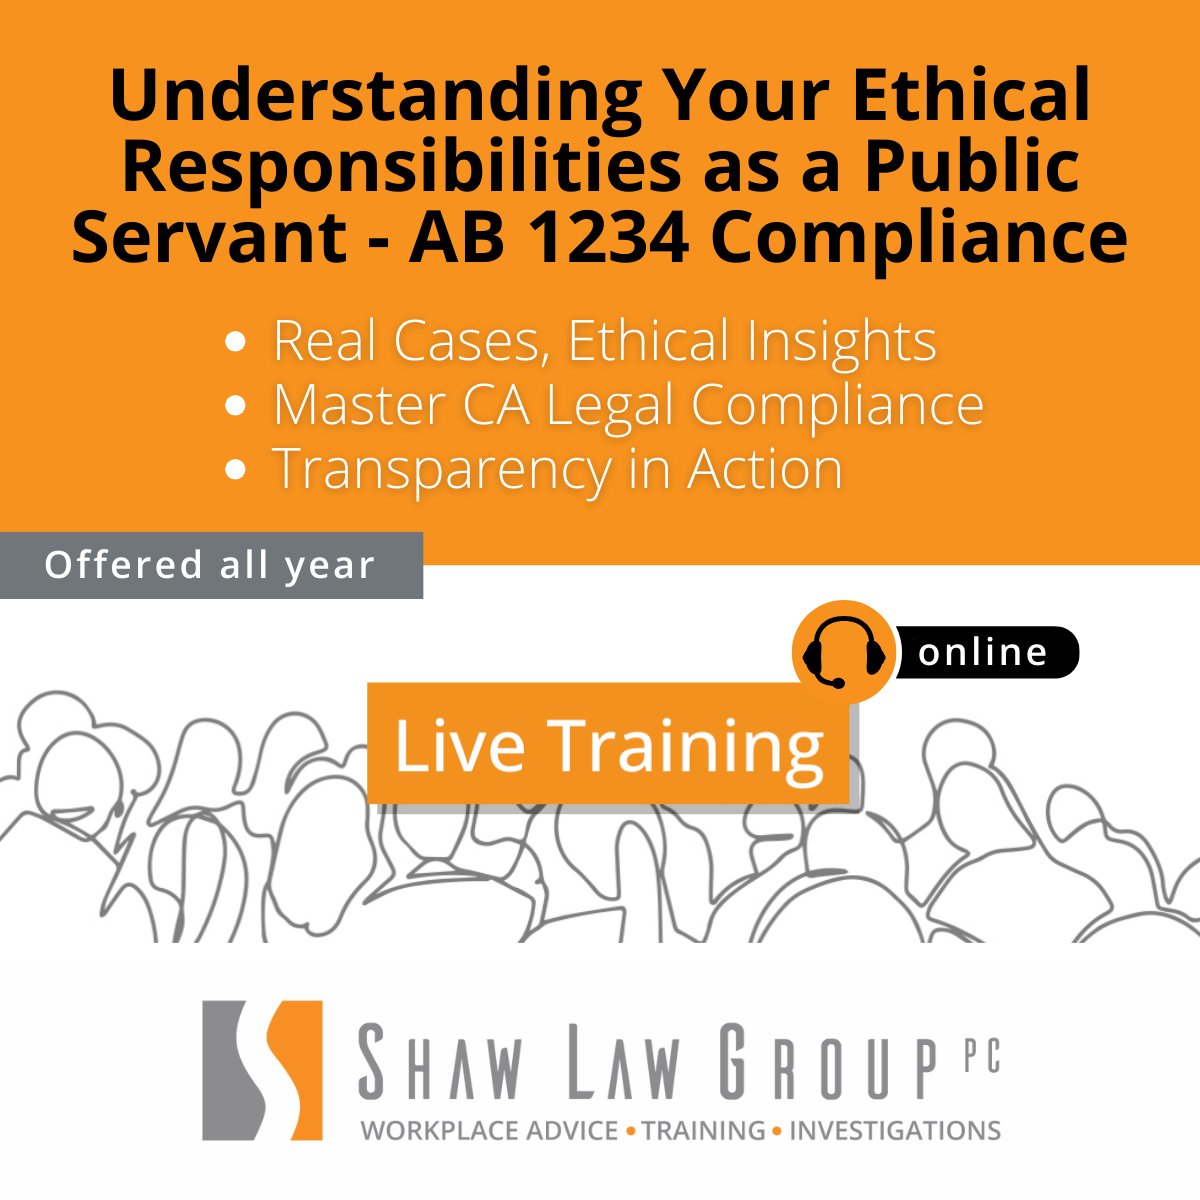 Last chance to register to attend the February 7th session.  More dates = May 23rd, Aug 7th, Oct 31st 

bit.ly/3O9ZZZq

#AB1234Compliance, #EthicsTraining, #PublicServantResponsibilities, #Form700, #GeneralEthicsLaws